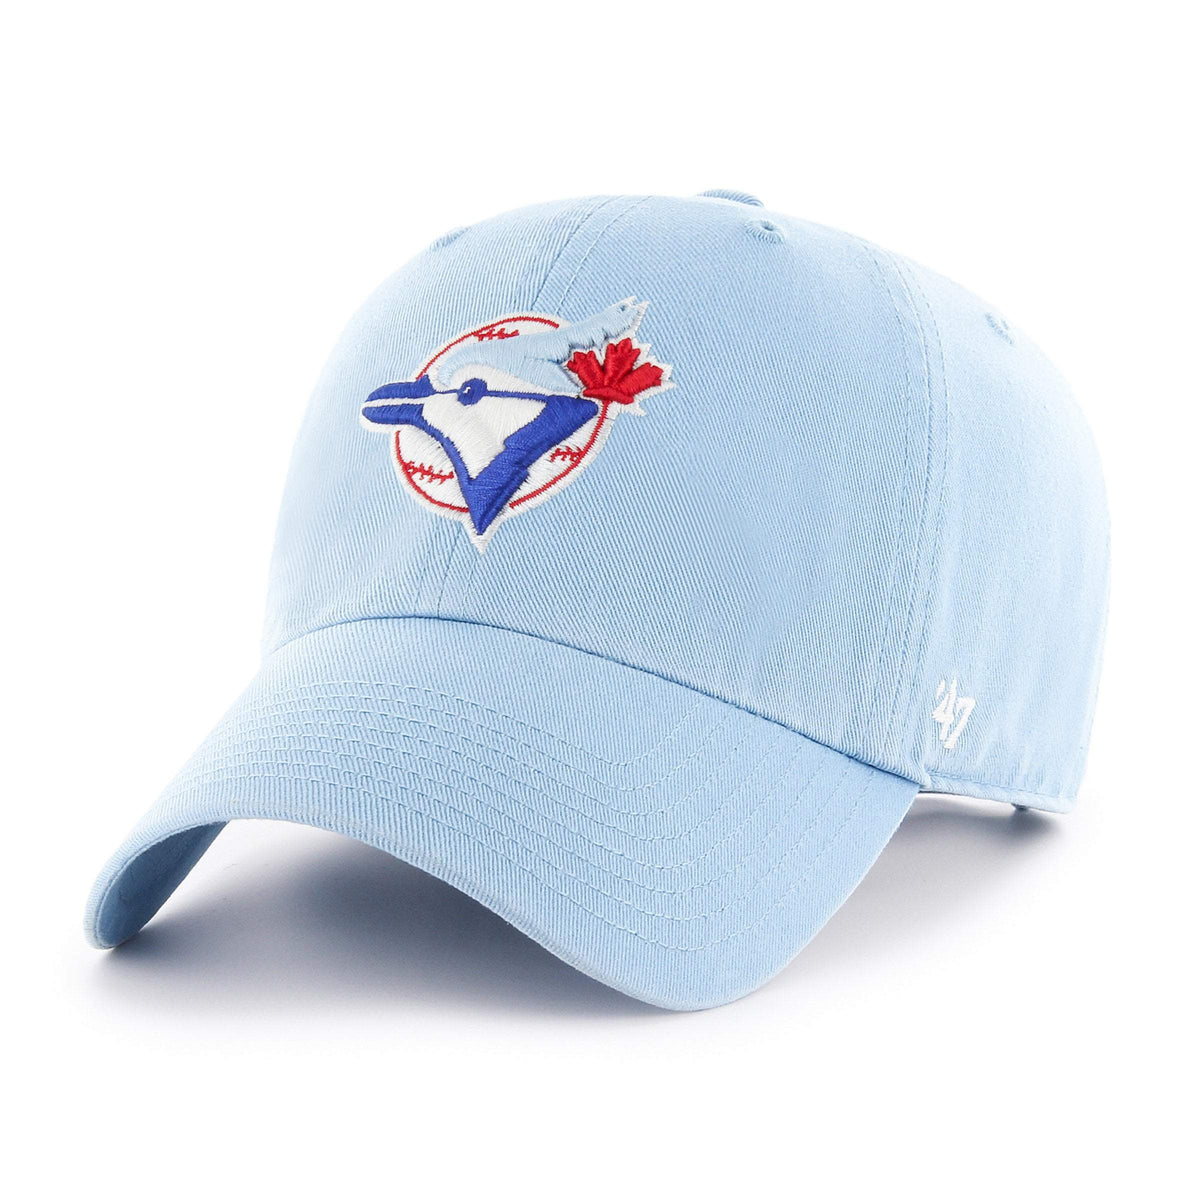 TORONTO BLUE JAYS COOPERSTOWN '47 CLEAN UP